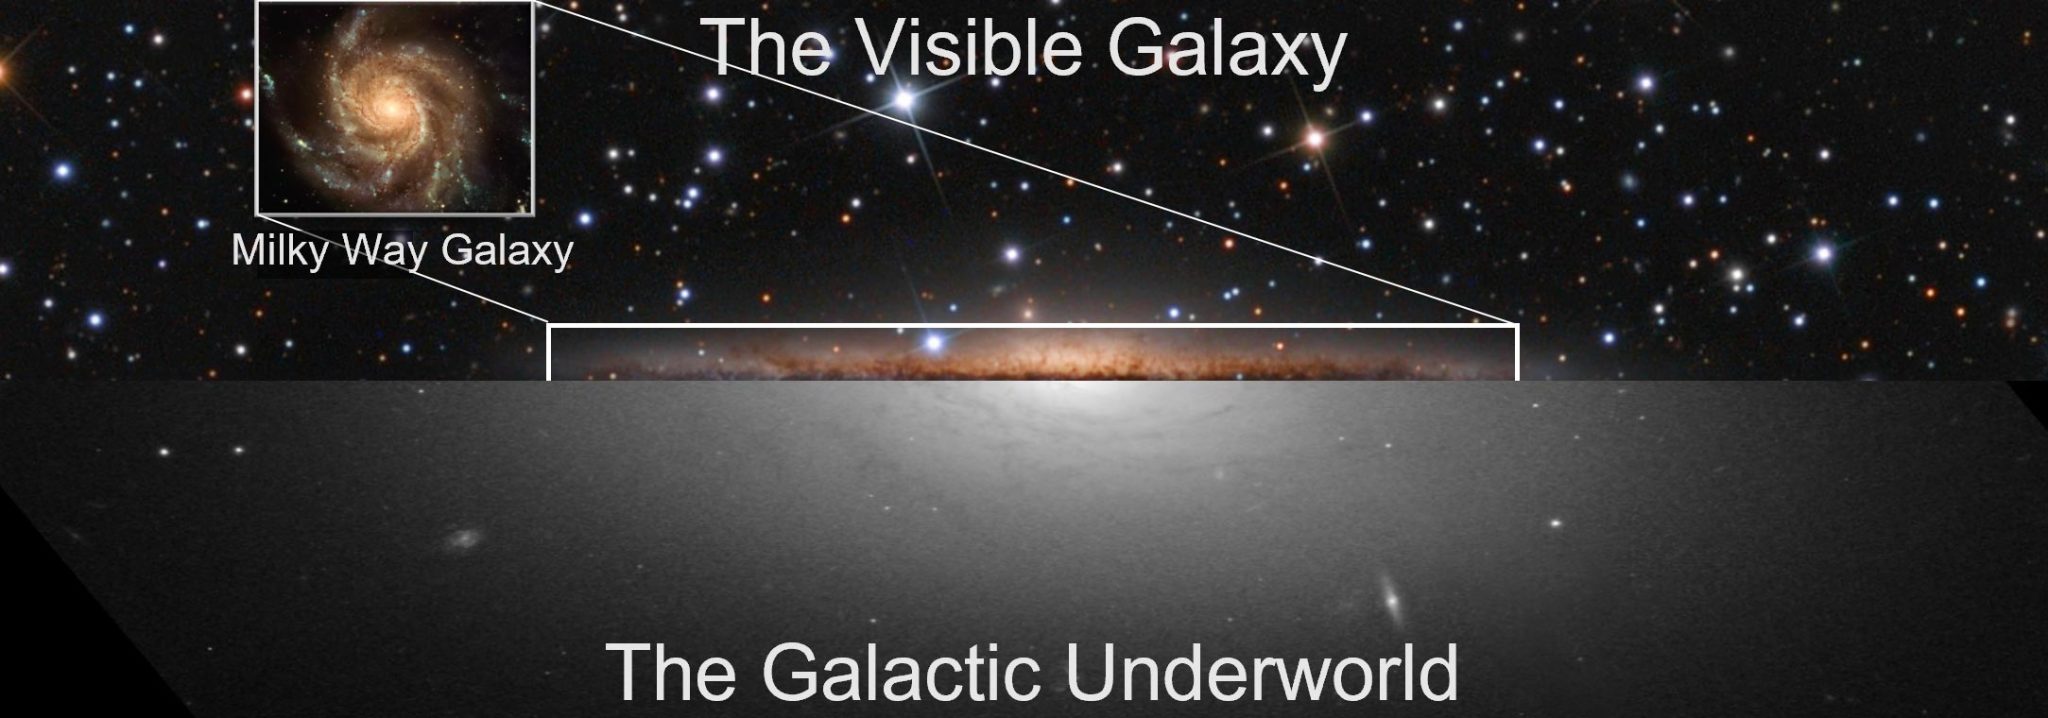 Visible Milky Way compared to its galactic underworld